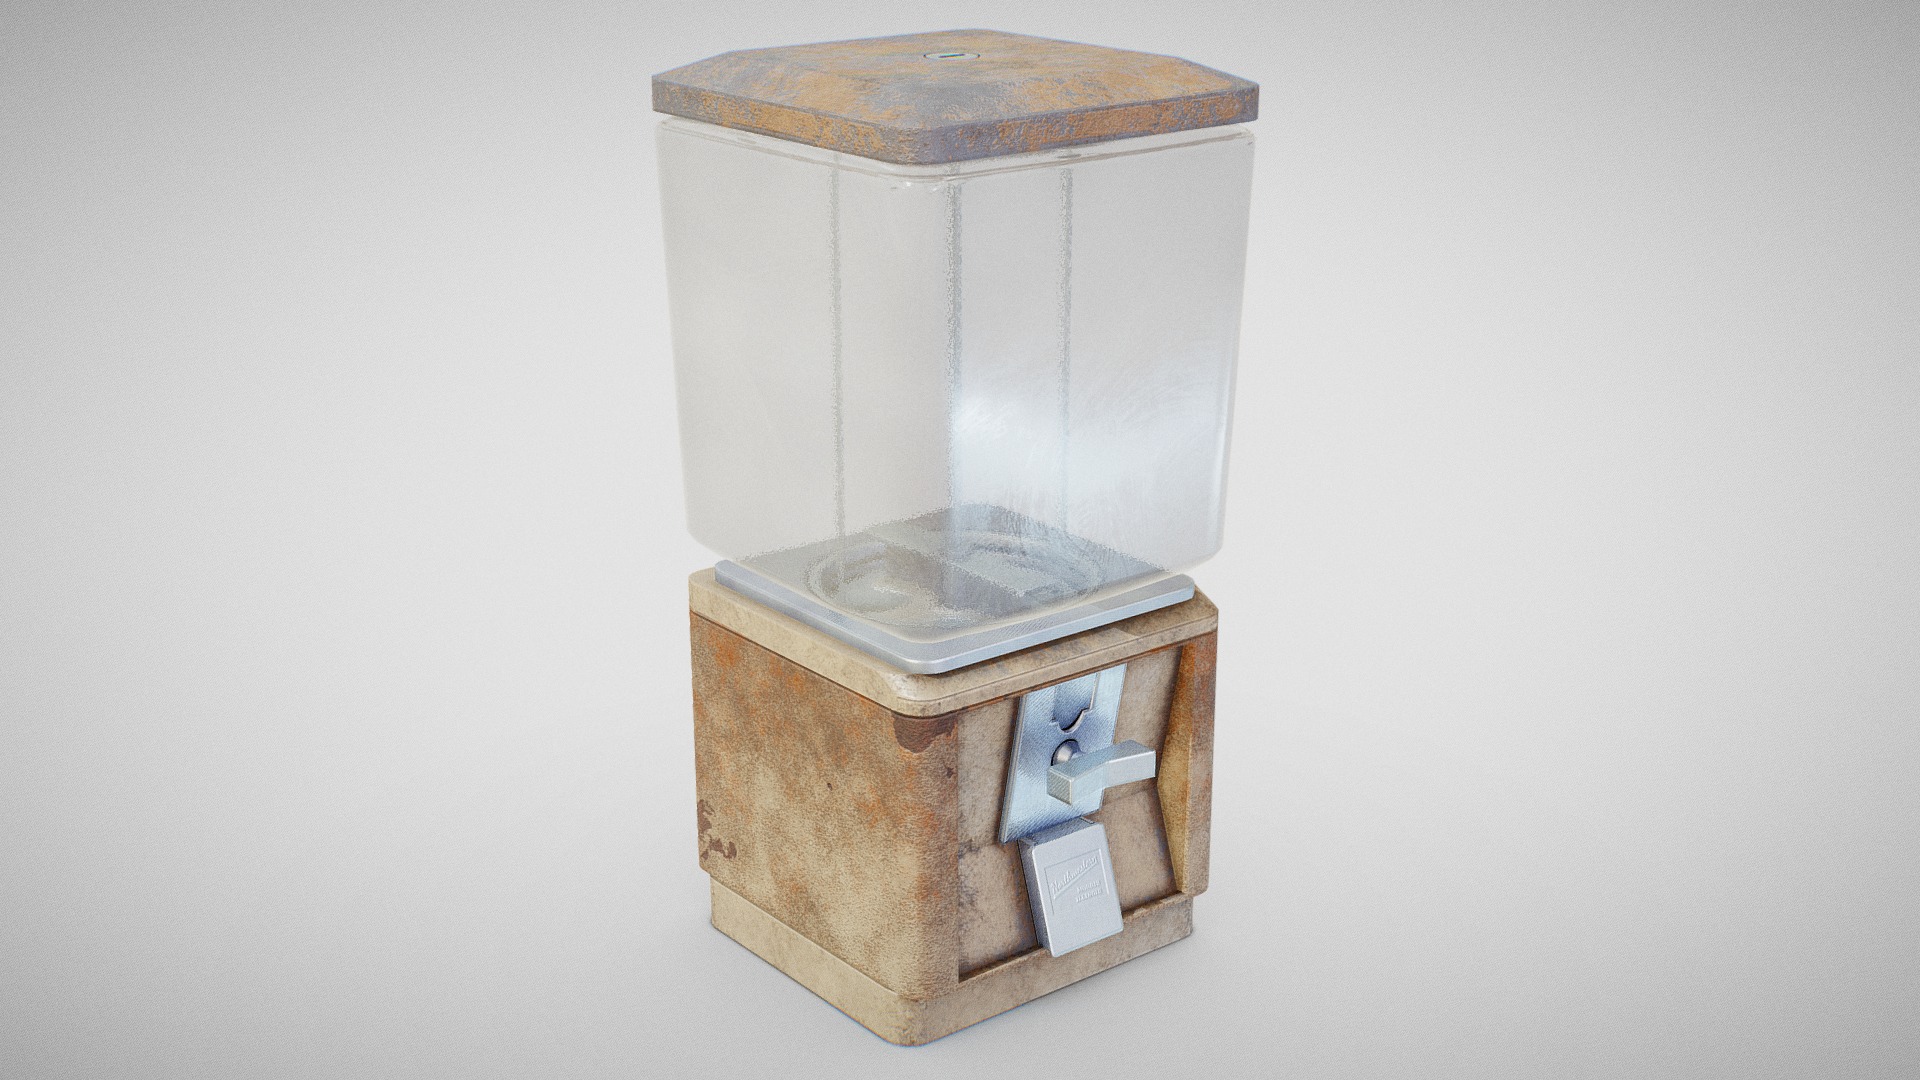 3D model Candy Machine – Model 60 (Rusty) - This is a 3D model of the Candy Machine - Model 60 (Rusty). The 3D model is about a glass container with a lid.